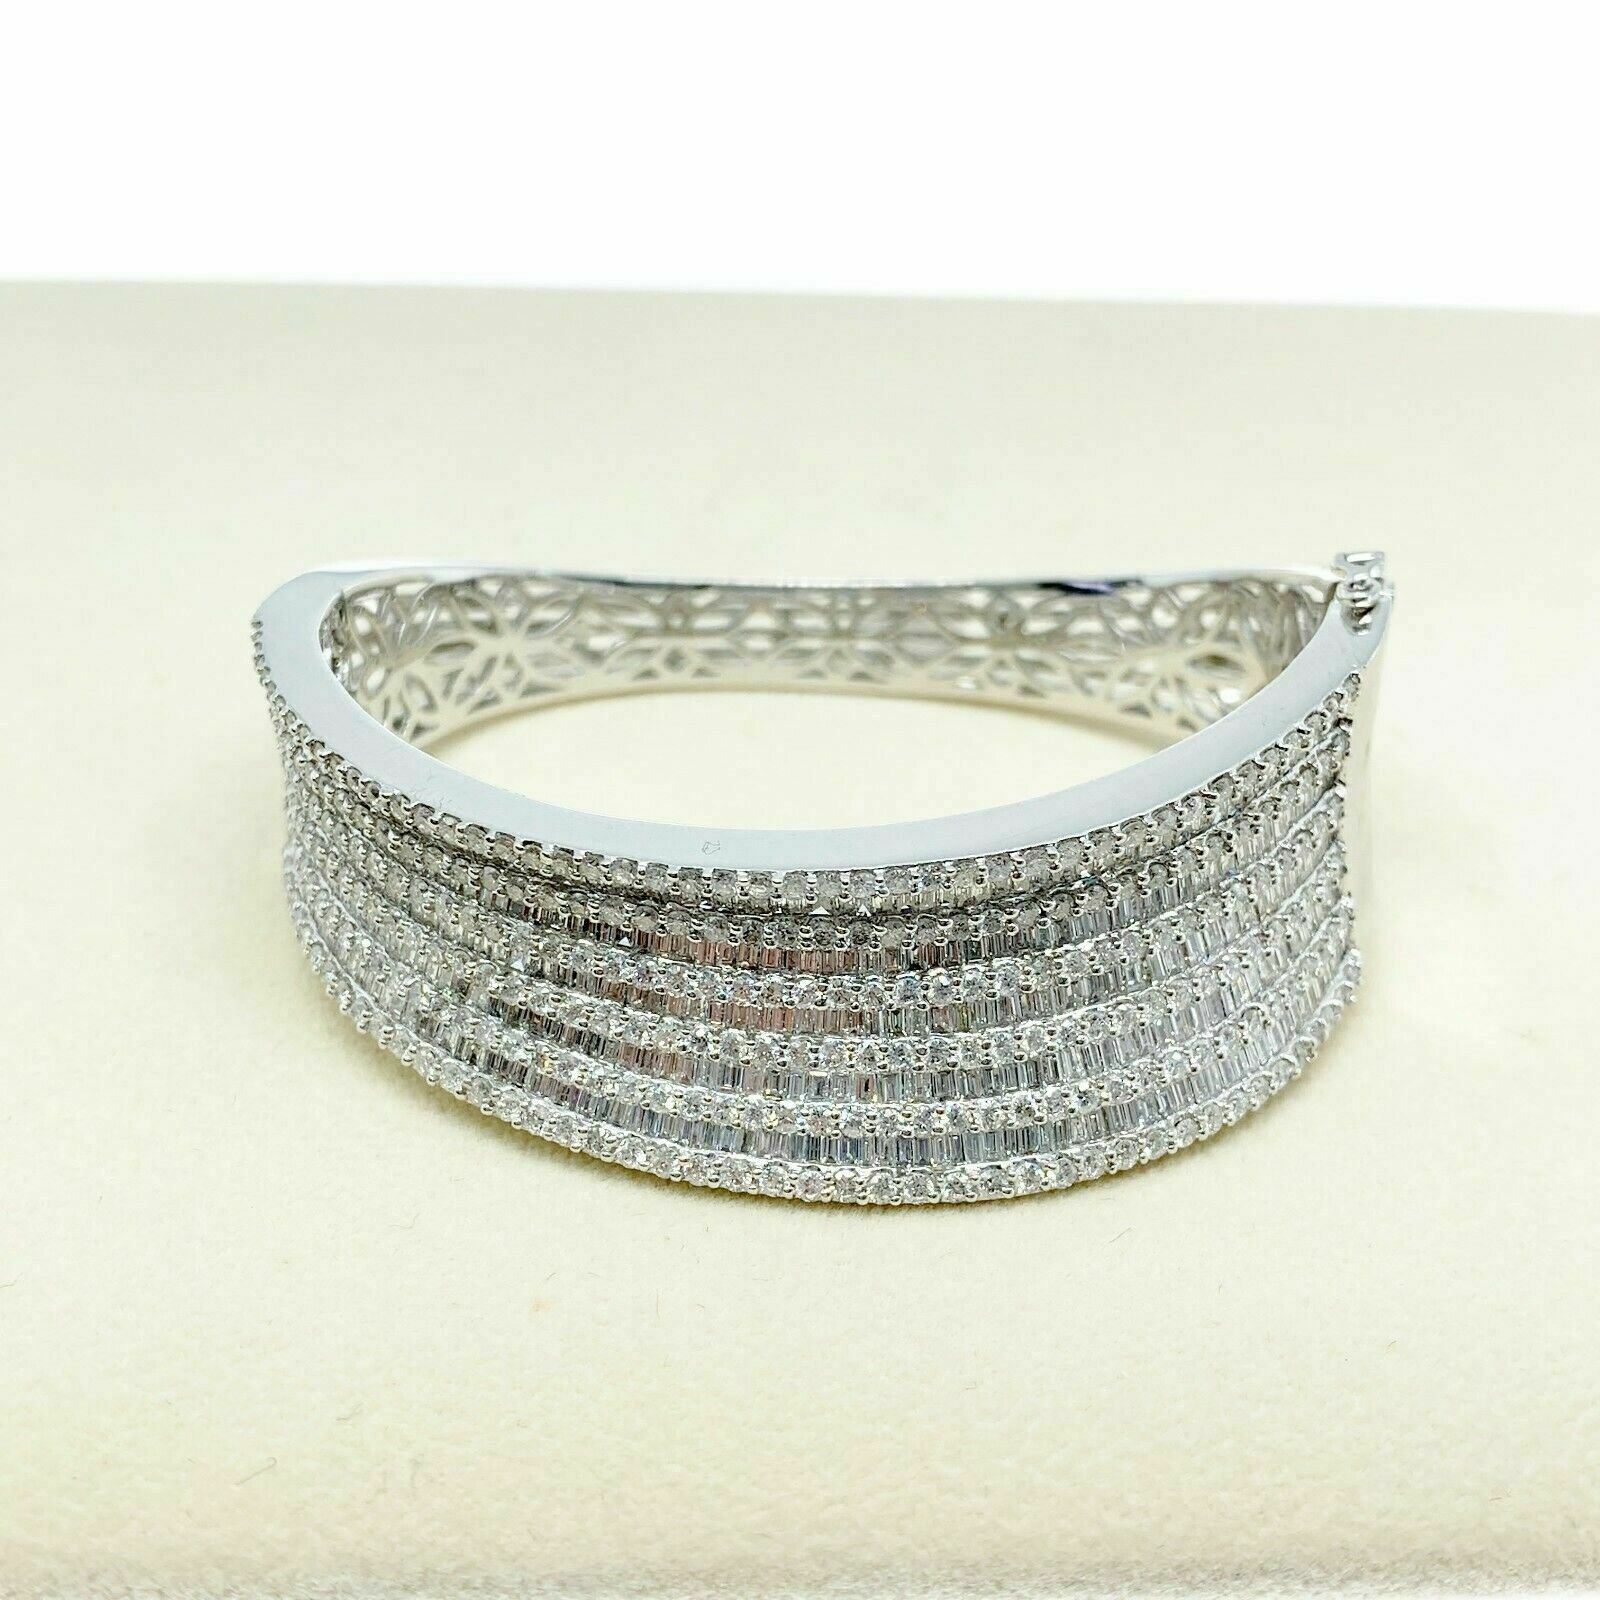 10.21Cts Round & Baguette Diamond 11 Rows Bangle 14k White Gold